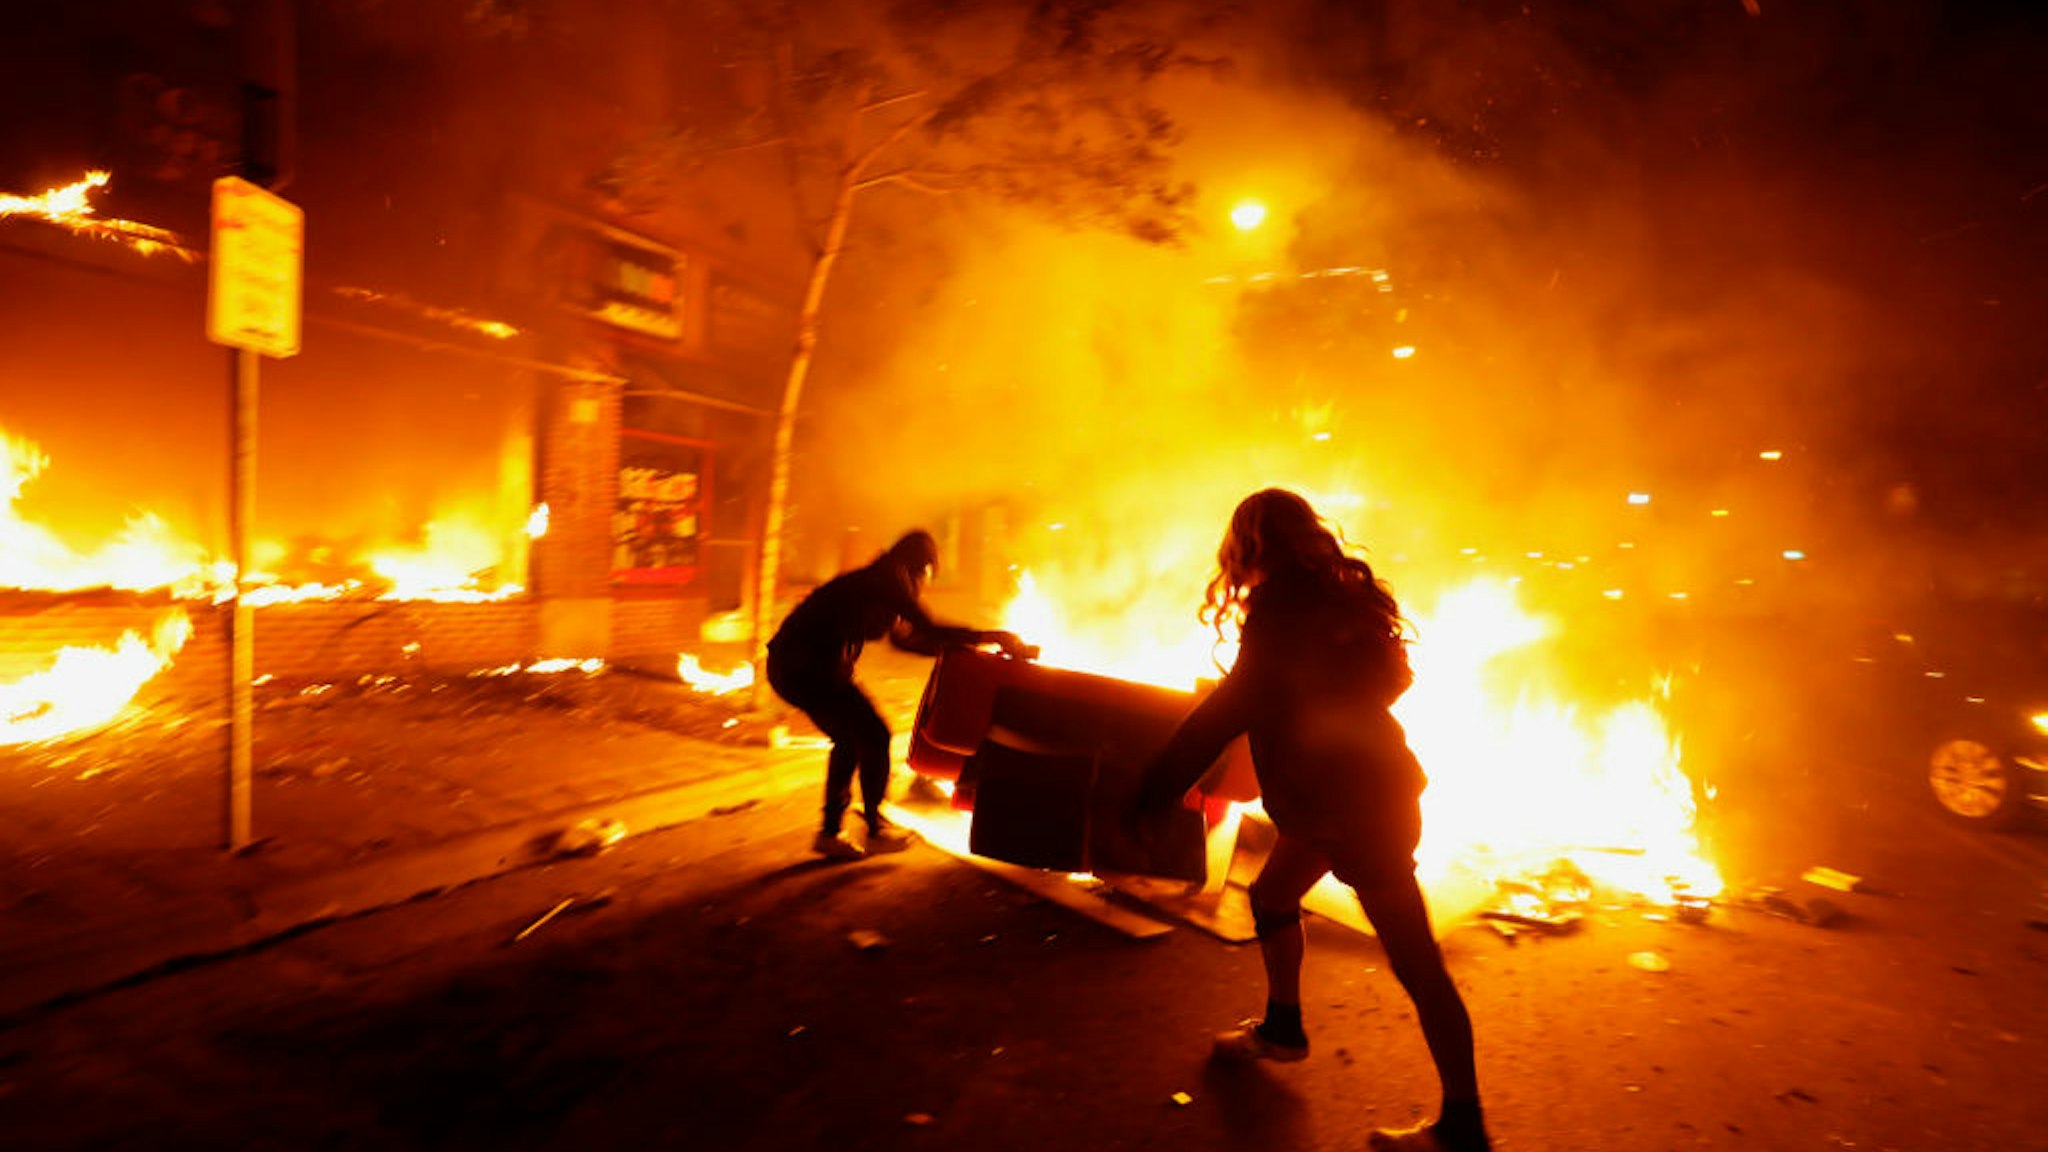 Despite a curfew, protests and looting went all throughout the night in various parts of the city of Minneapolis on Friday night, May 29, 2020.